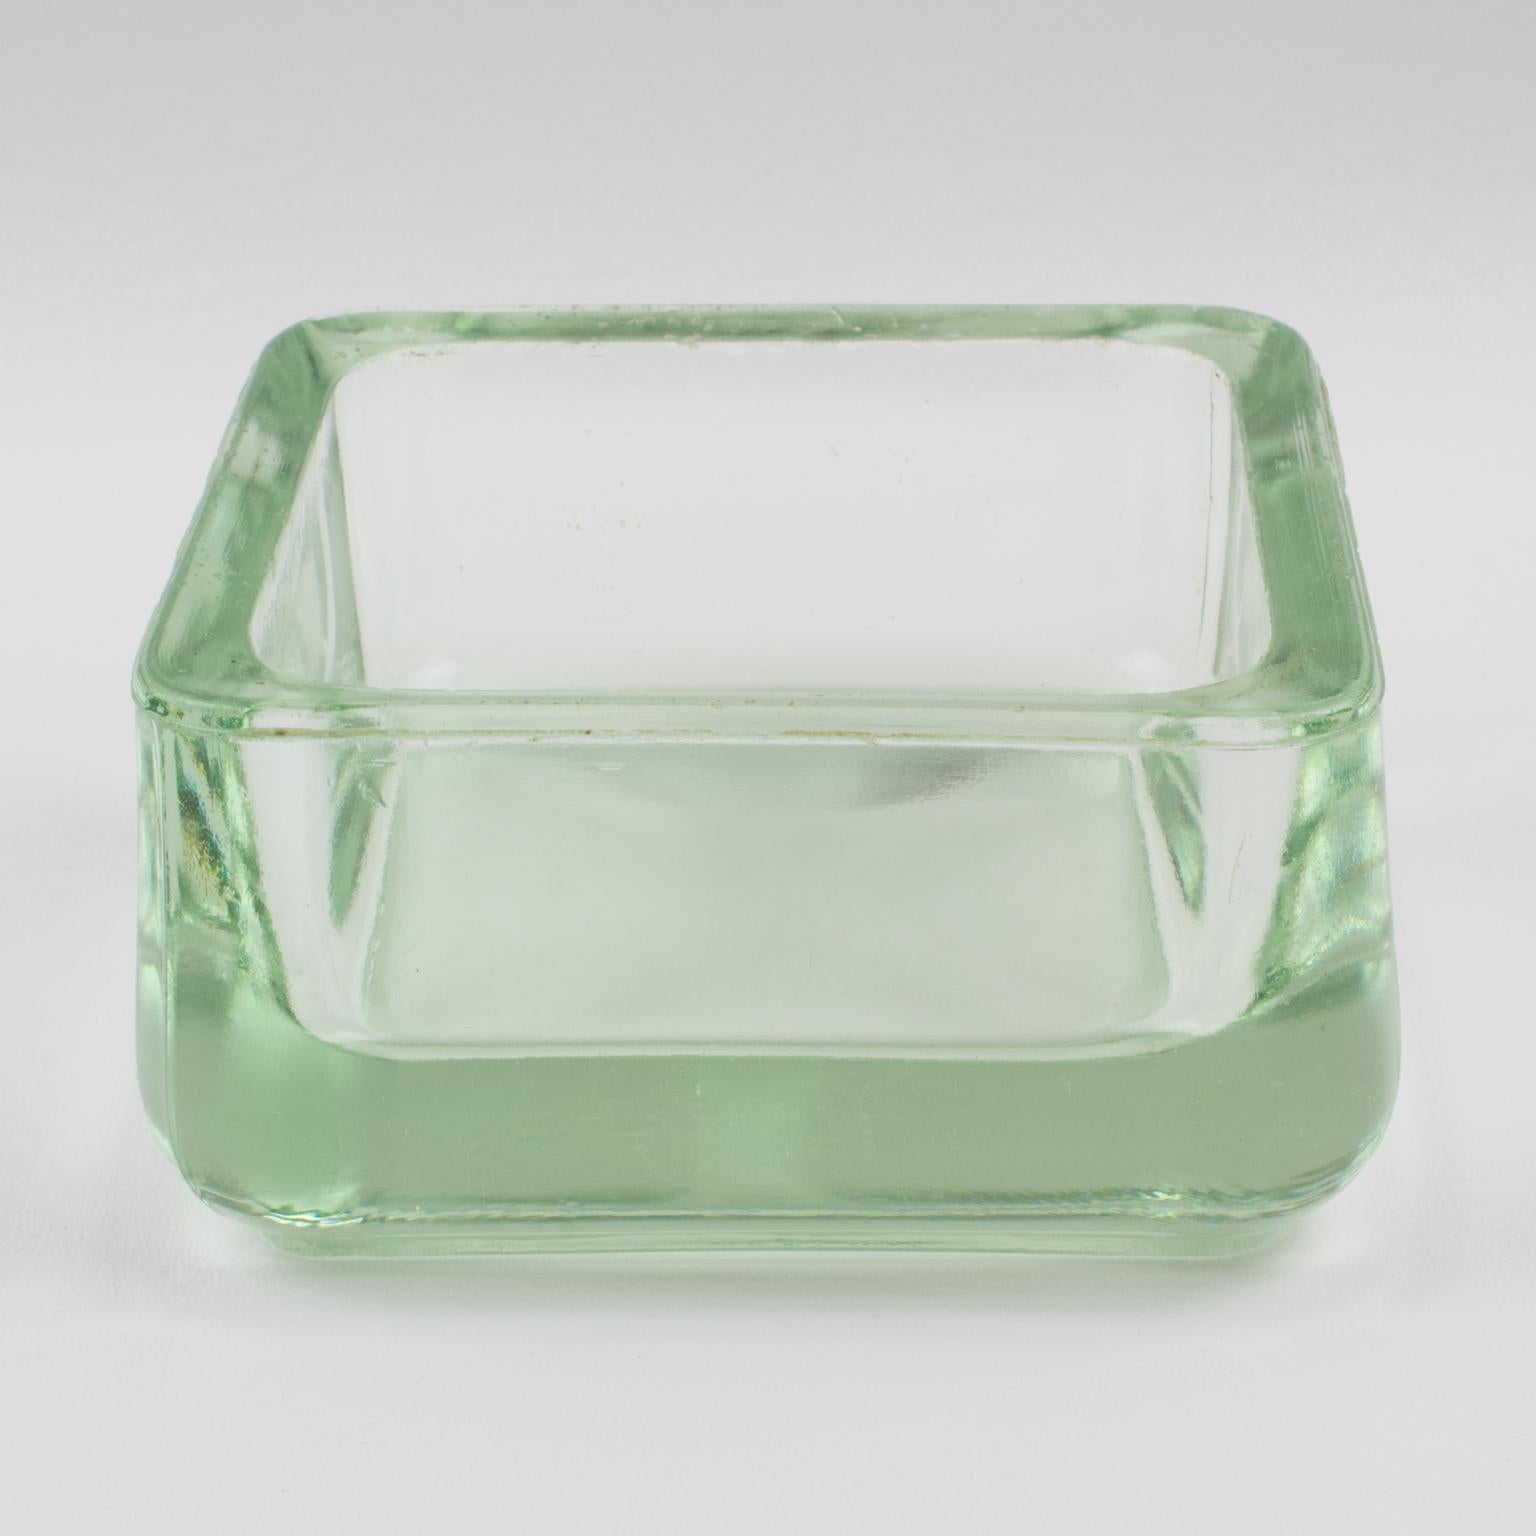 Mid-20th Century Designed by Le Corbusier for Lumax Molded Glass Desk Accessory Ashtray Catchall